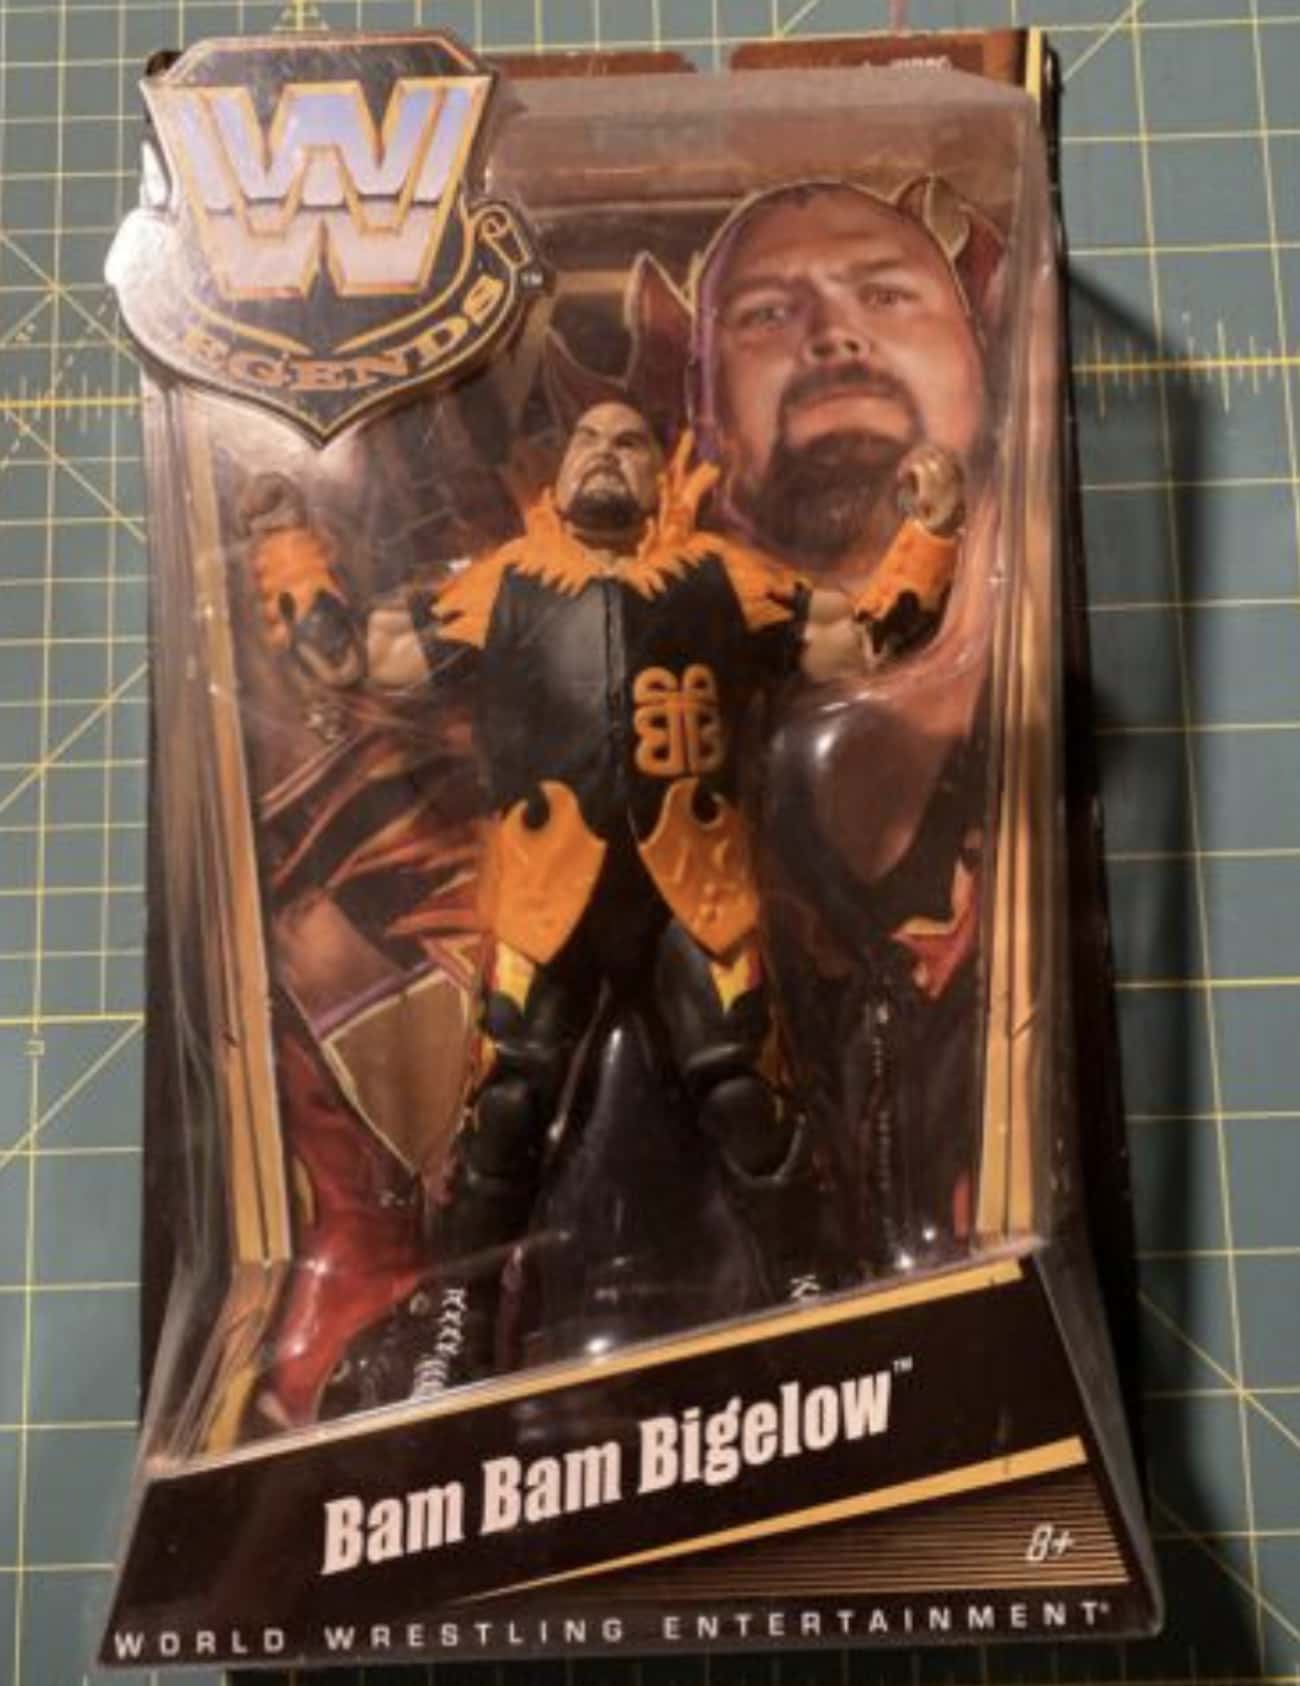 'Bam Bam' Bigelow Saved Three Children From A Burning Building